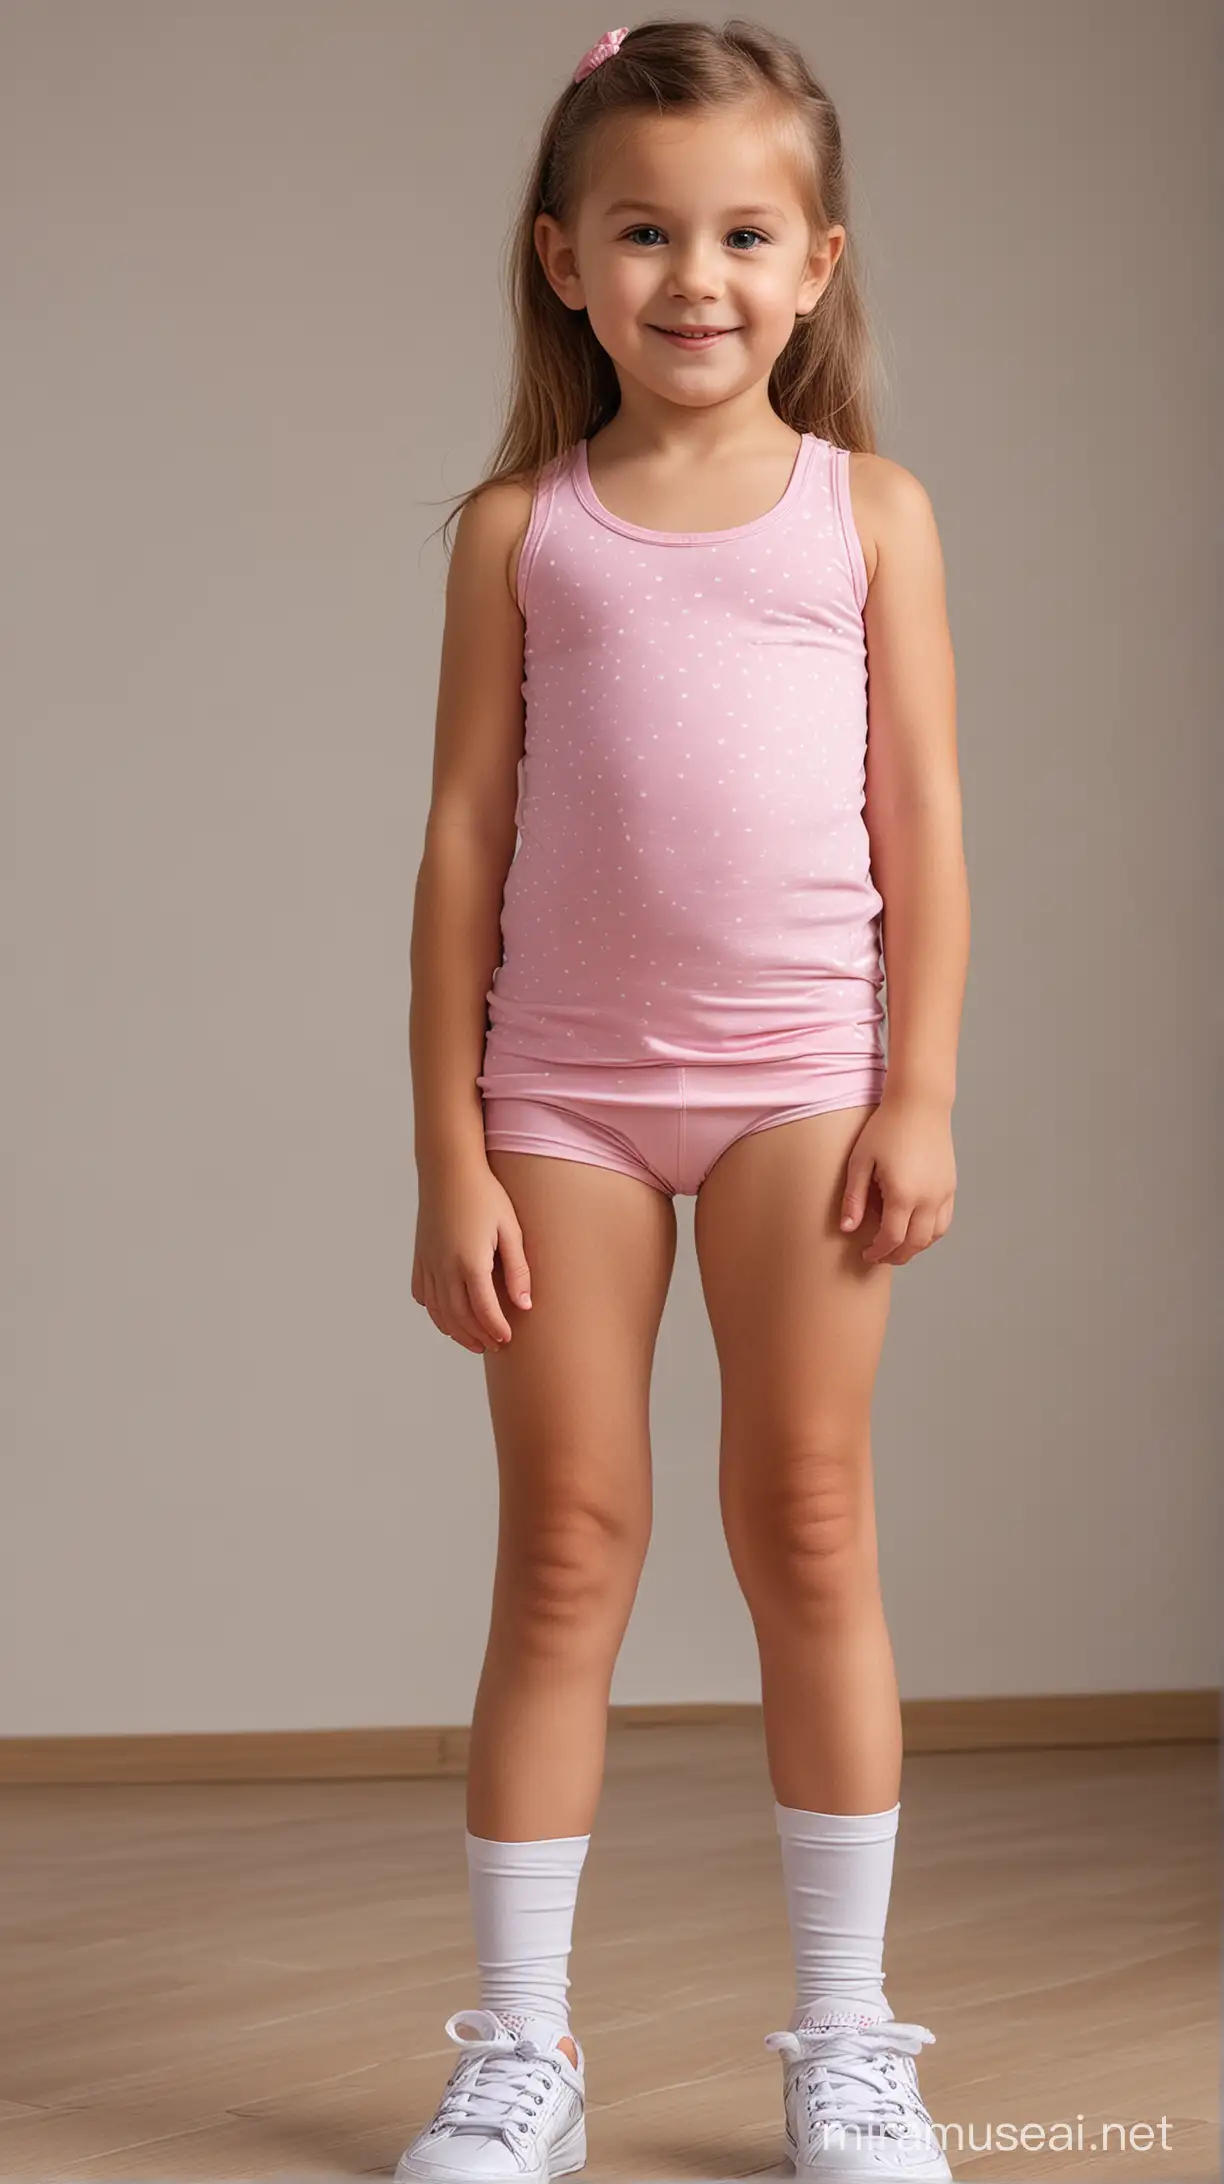 Little girl 6 years, wearing a tight legging shorts